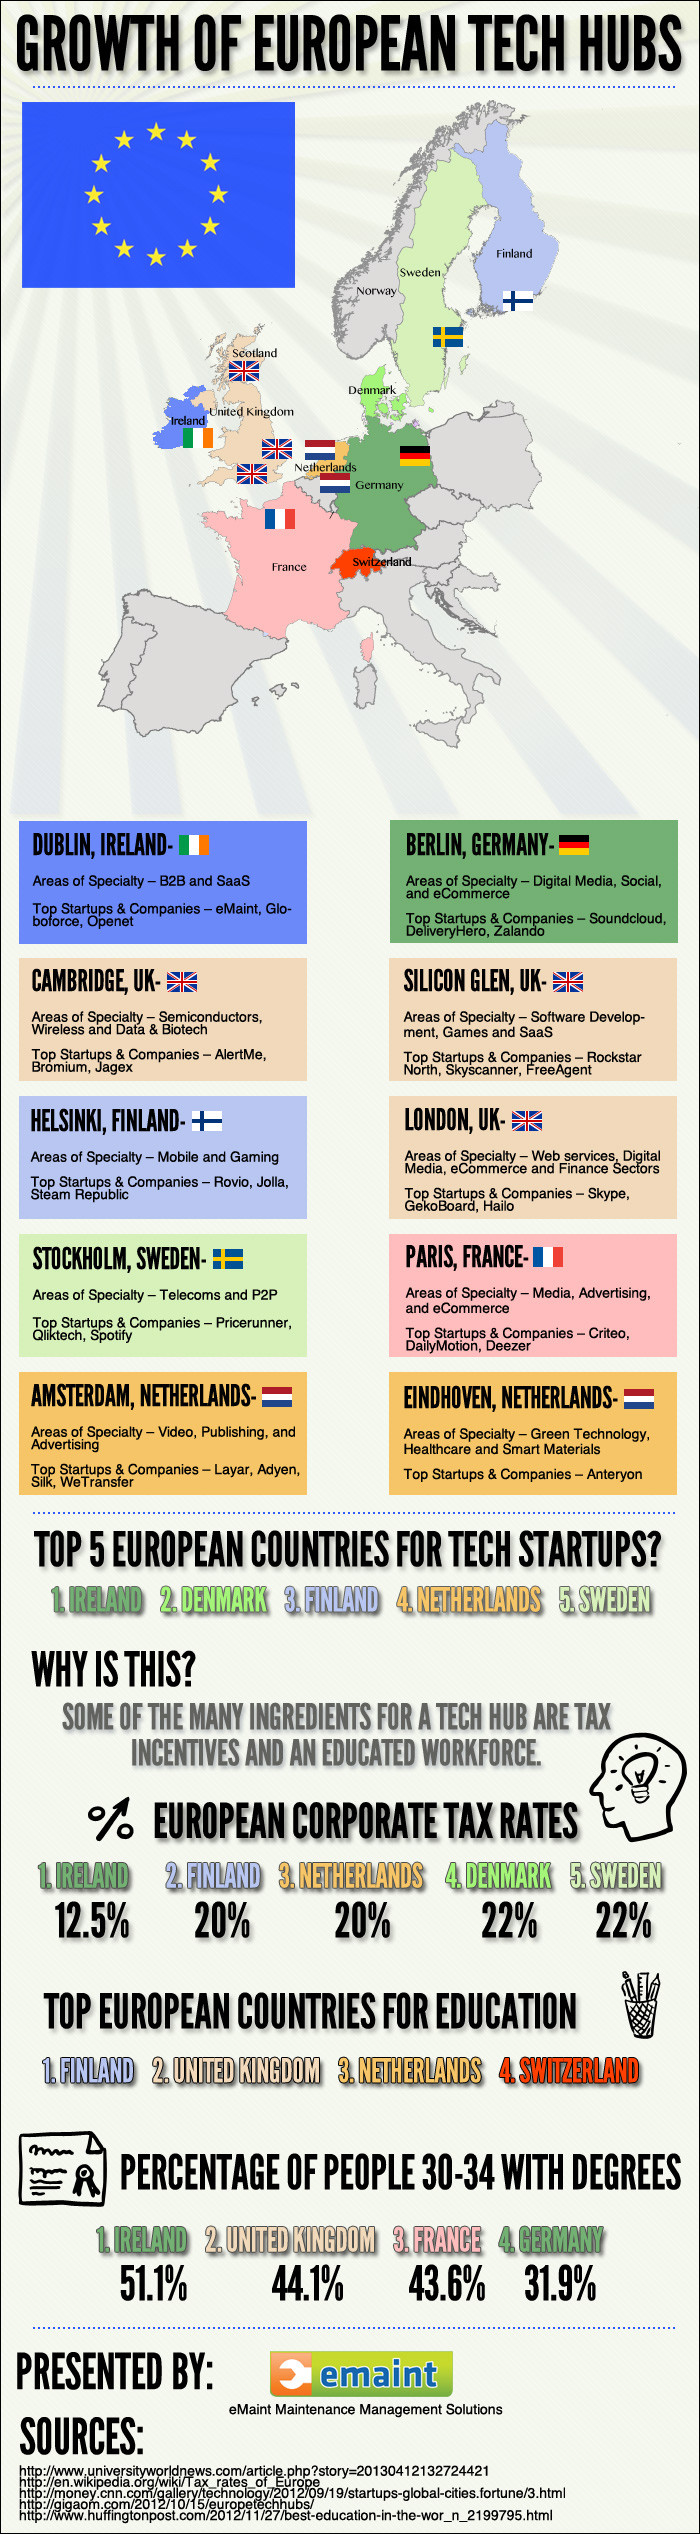 Growth of European Tech Hubs infographic image